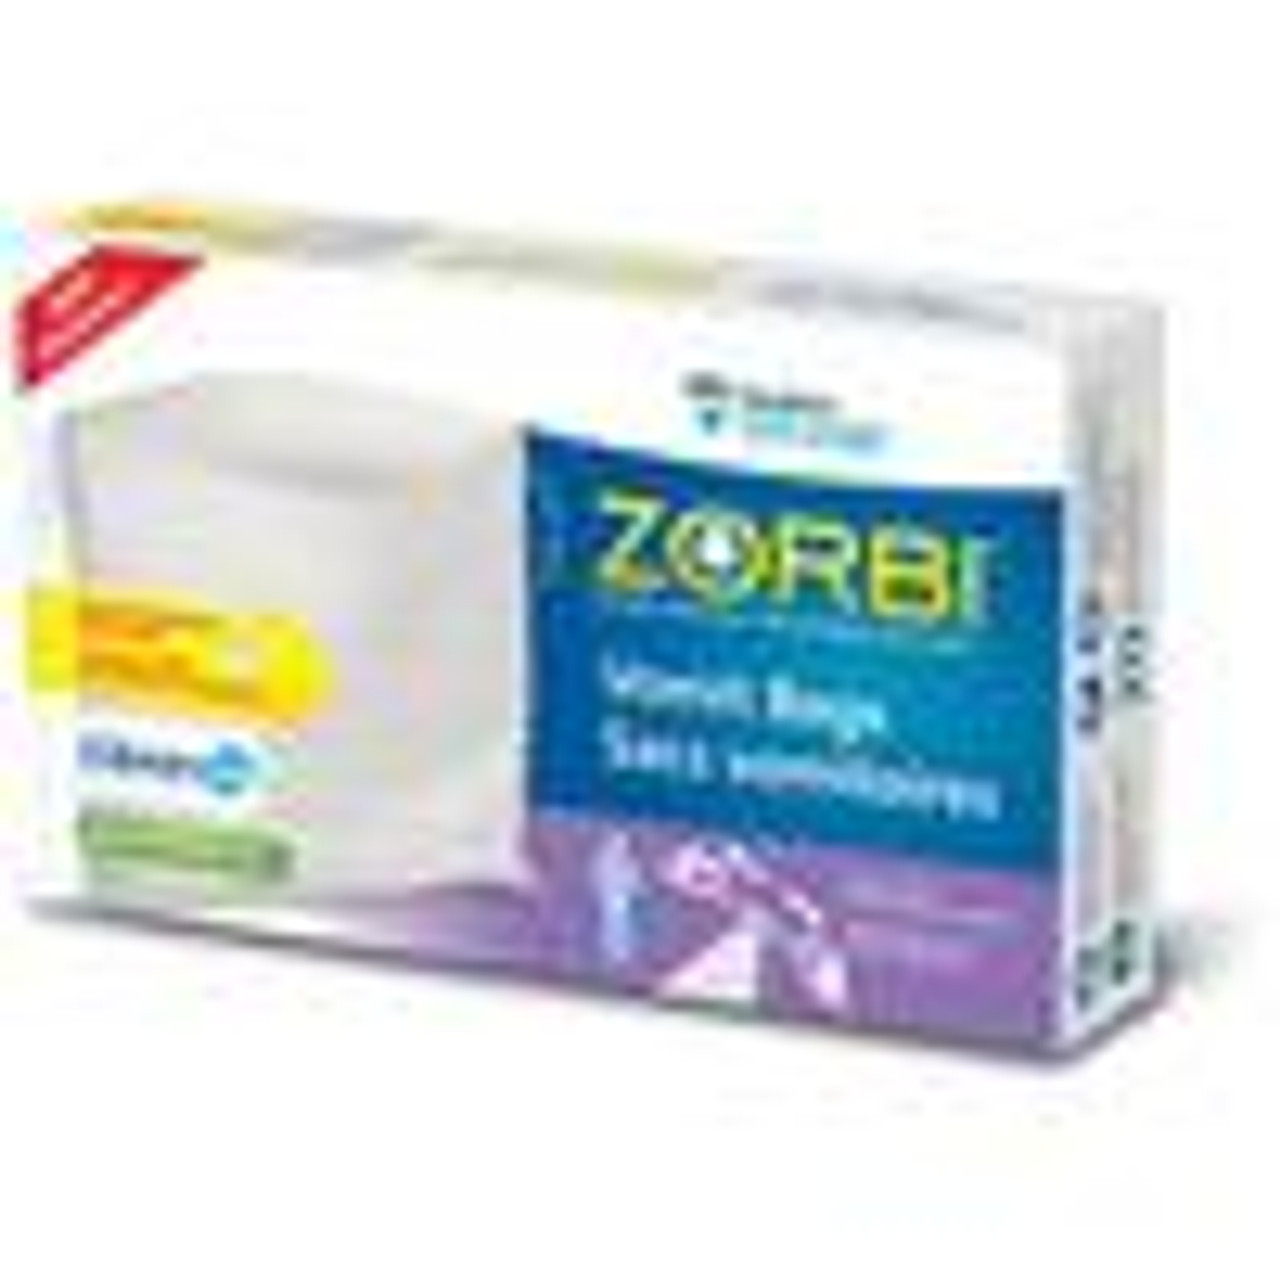 AMG 764-127 ZORBI VOMIT BAGS WITH CLEANIS TECHNOLOGY BX/20 (AMG 764-127)